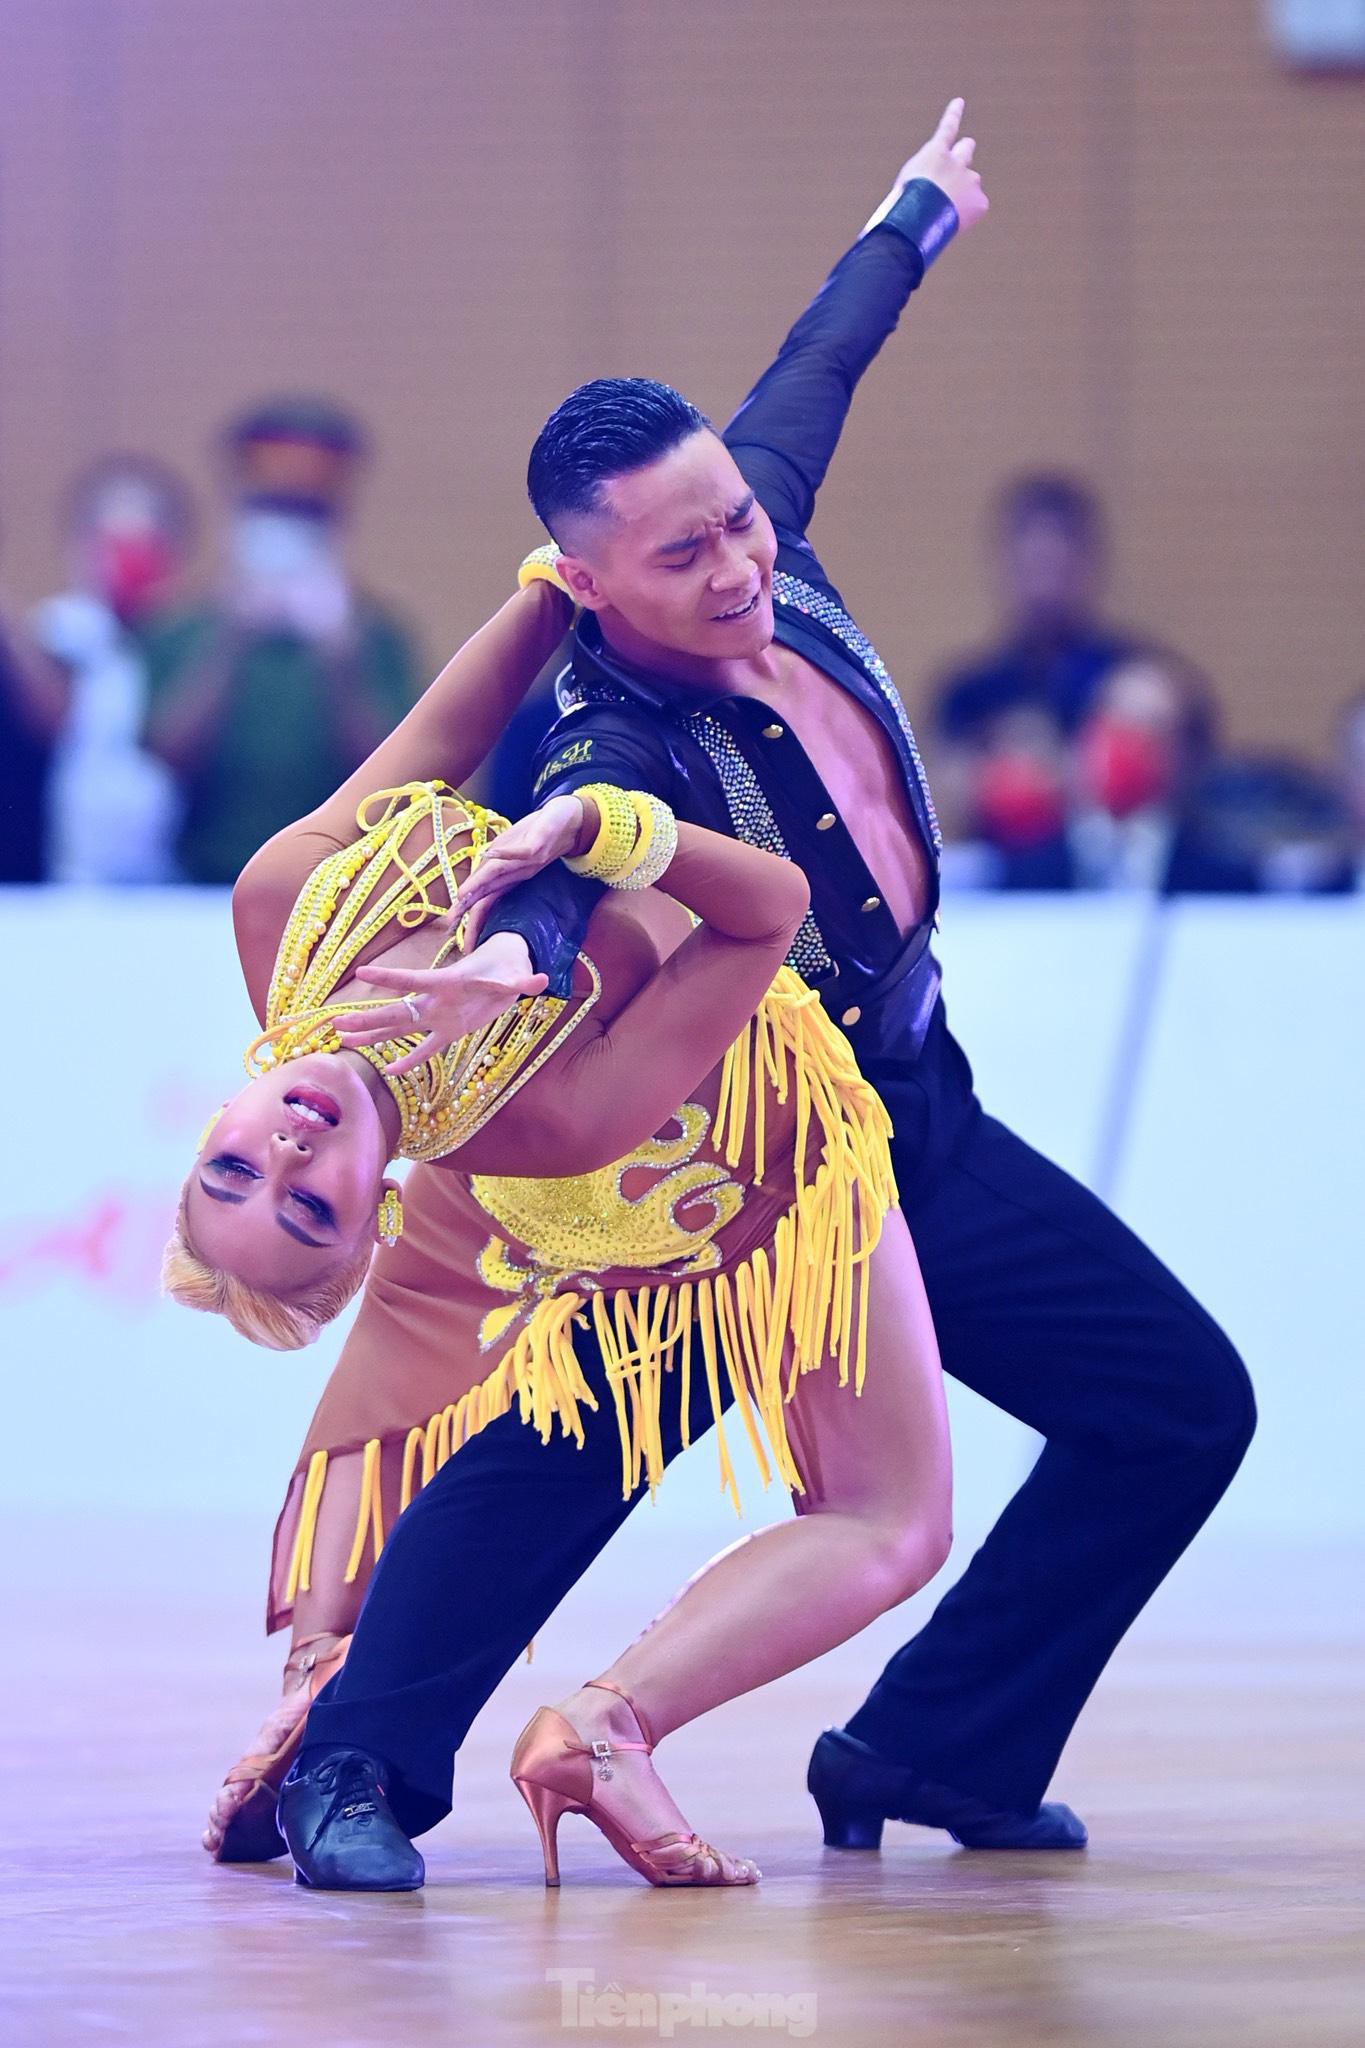 Watch the mesmerizing dance that helped Dancesport Vietnam win 5 gold medals at the 31st SEA Games - Photo 3.